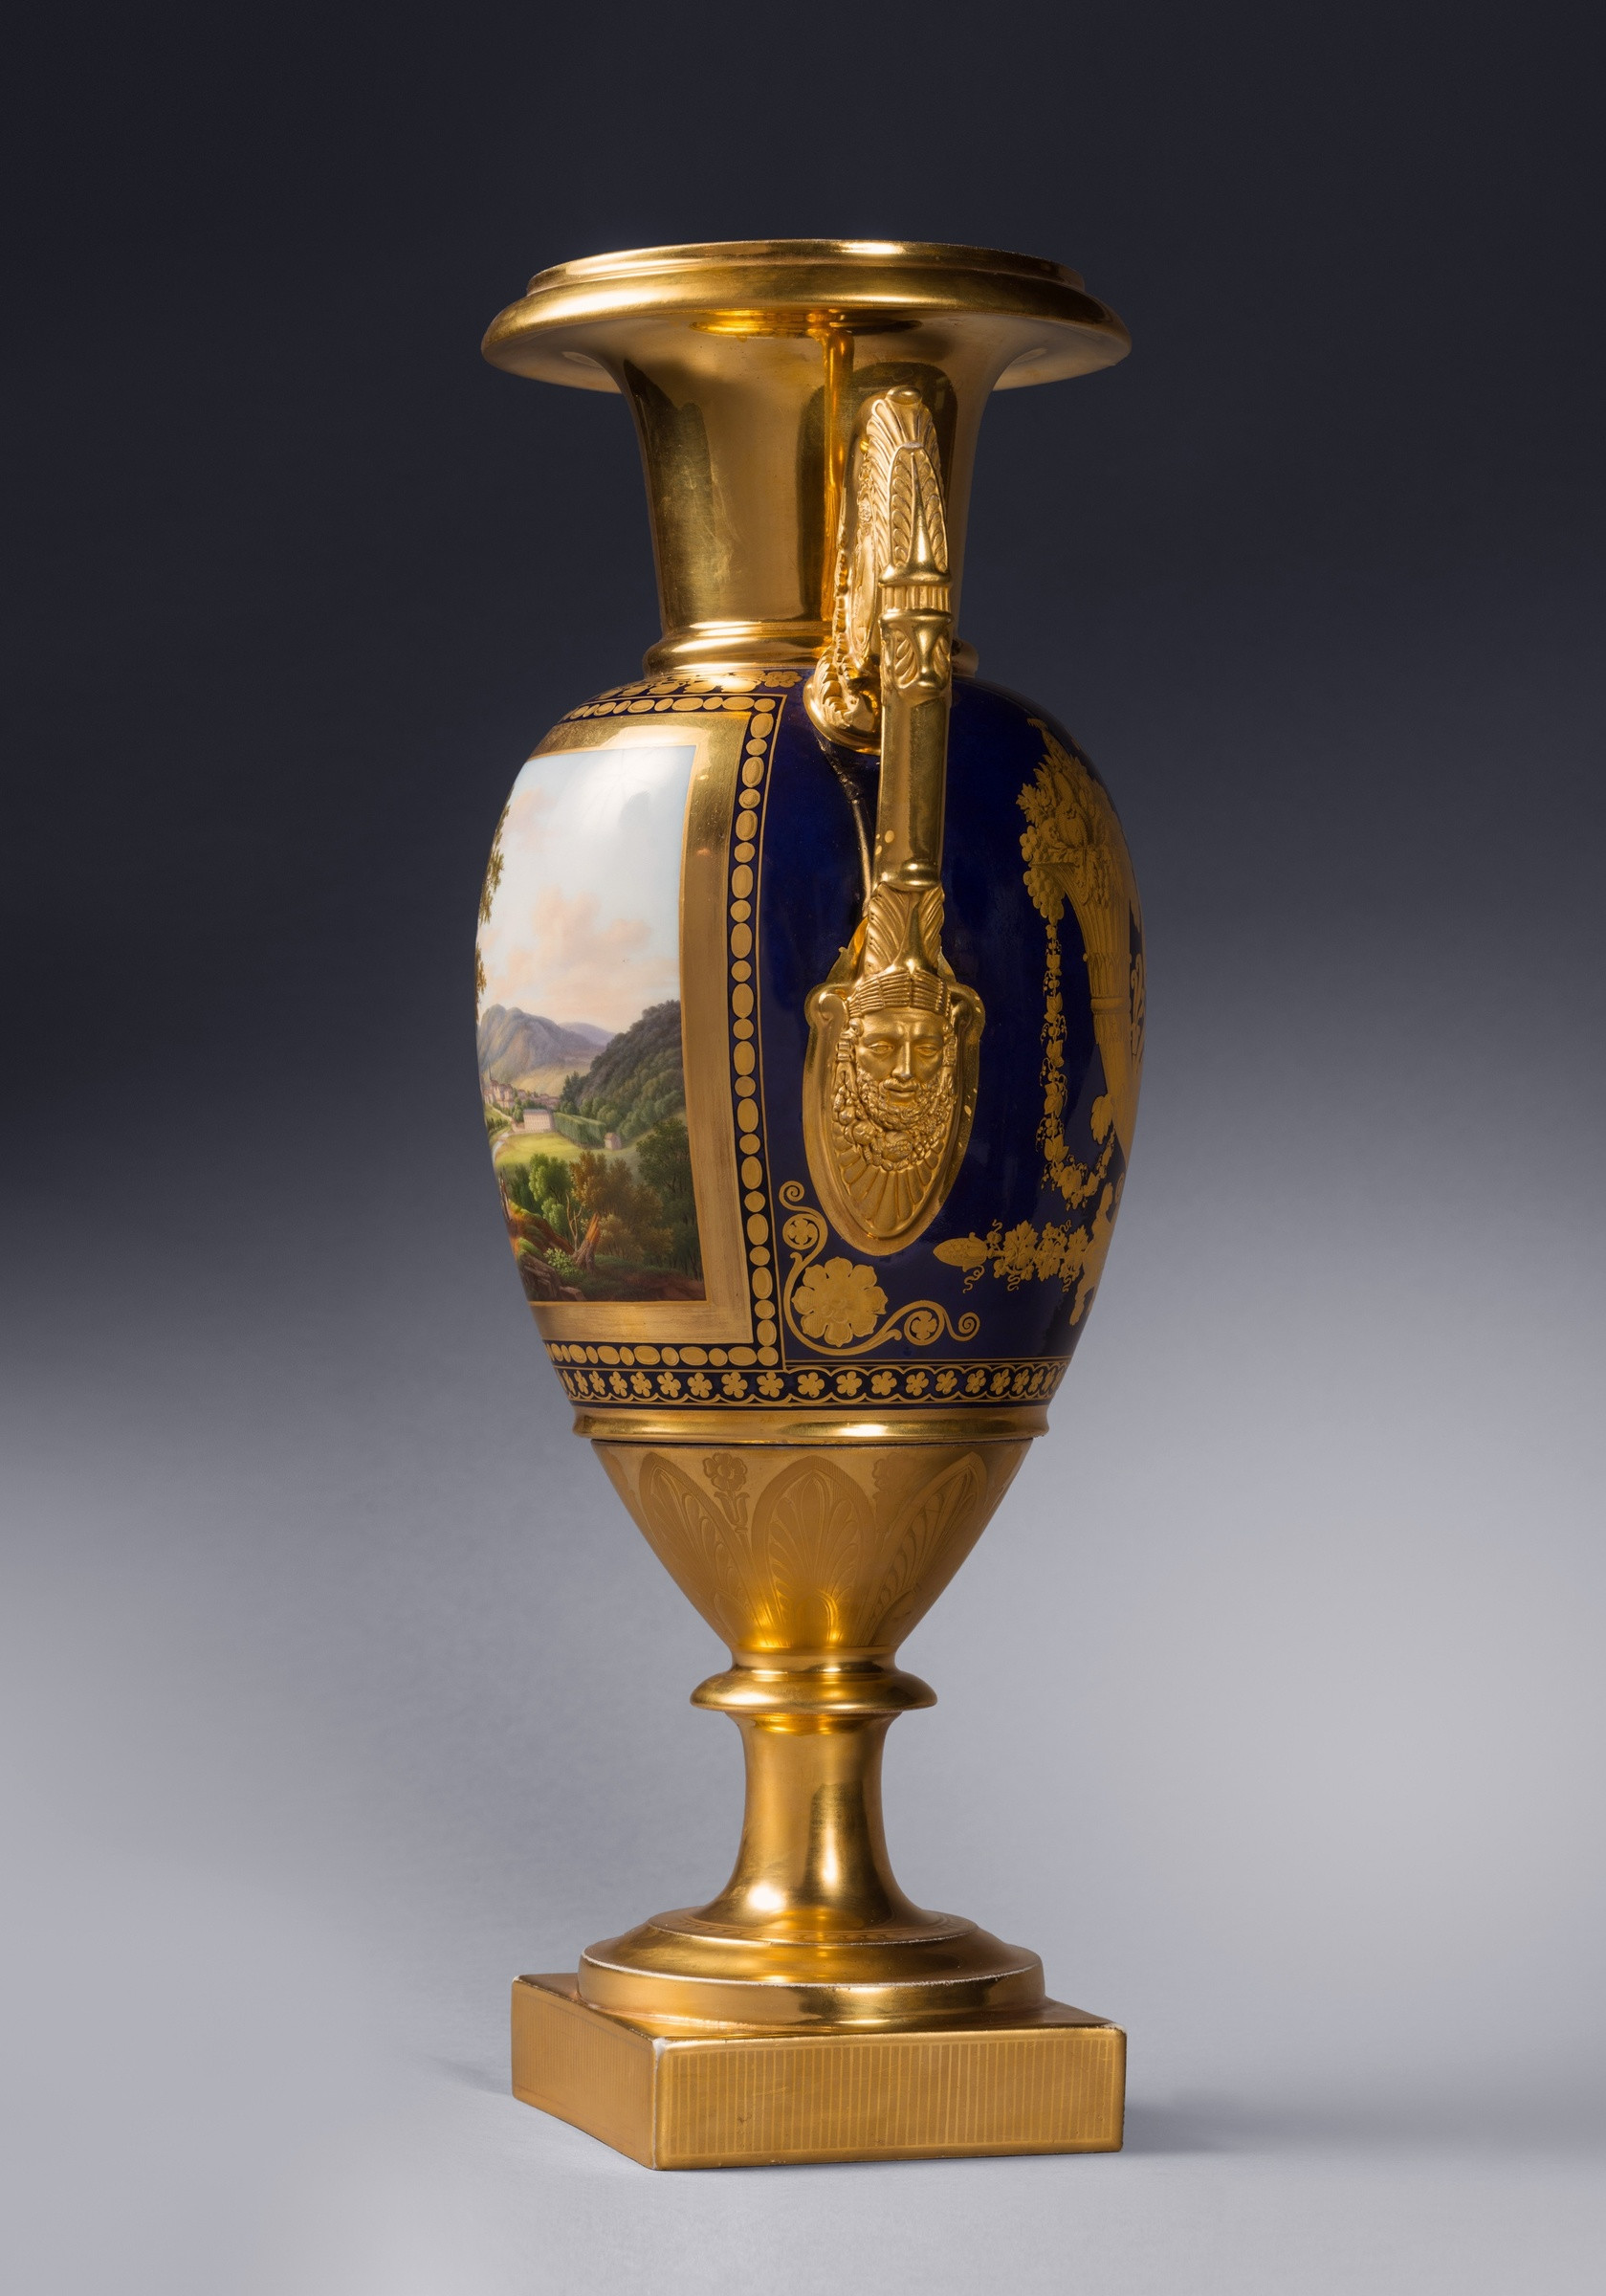 11 Awesome Metal Urn Vase 2024 free download metal urn vase of nast frac2a8res manufactory attributed to a pair of restauration two pertaining to a pair of restauration two handled vases probably by nast frac2a8res manufactory